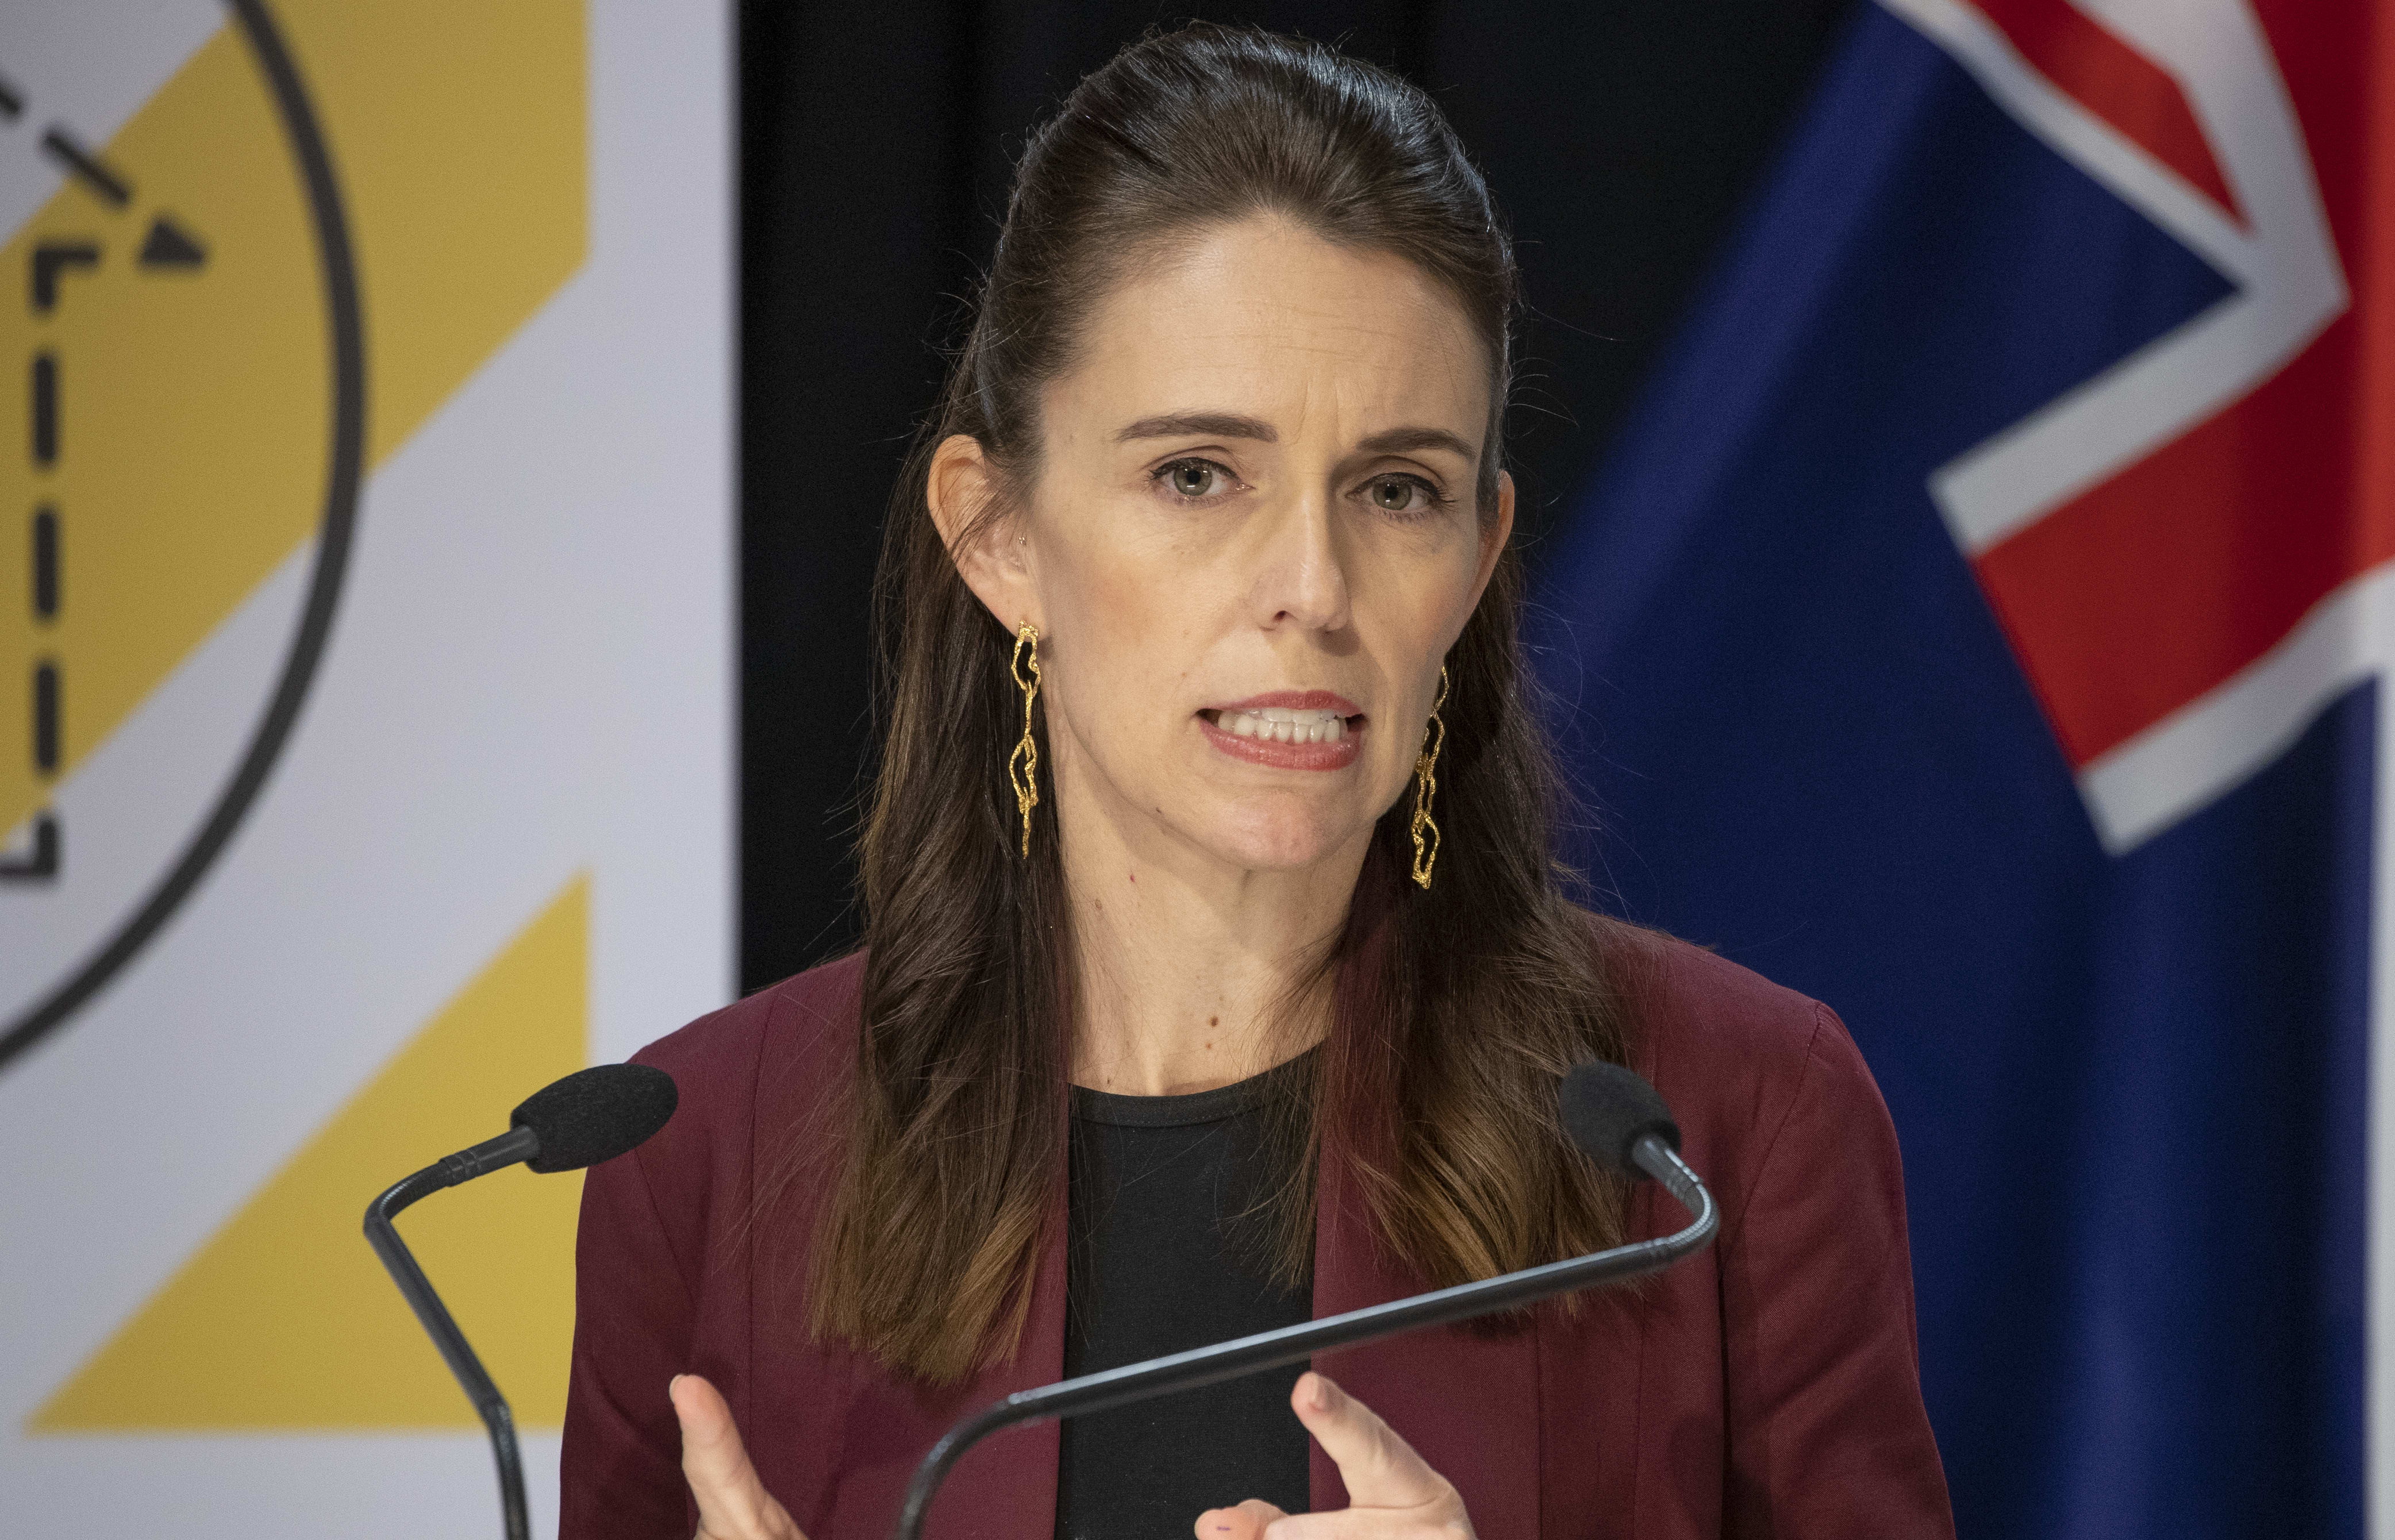 Prime Minister Jacinda Ardern during the All of Government Covid-19 update media conference, at Parliament, on Day 33 of the Covid-19 coronavirus lockdown. 27 April, 2020.